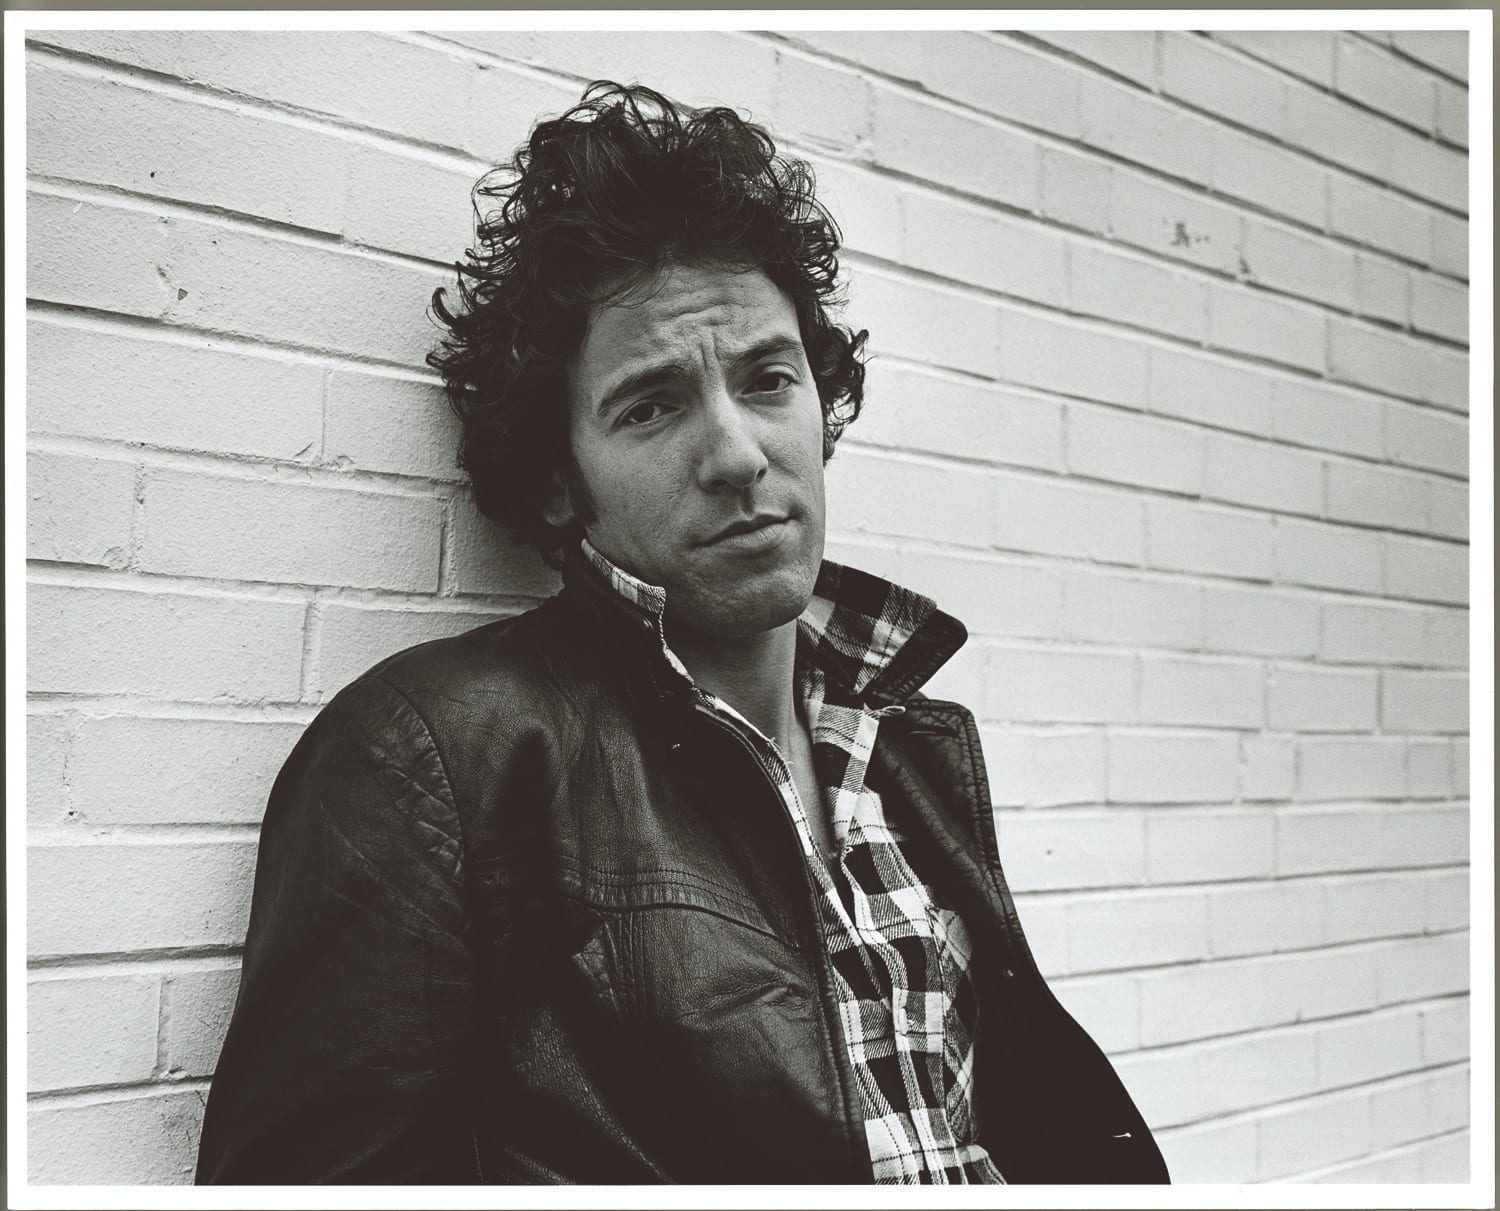 Bruce Springsteen Darkness on the Edge of Town era photo by Frank Stefanko